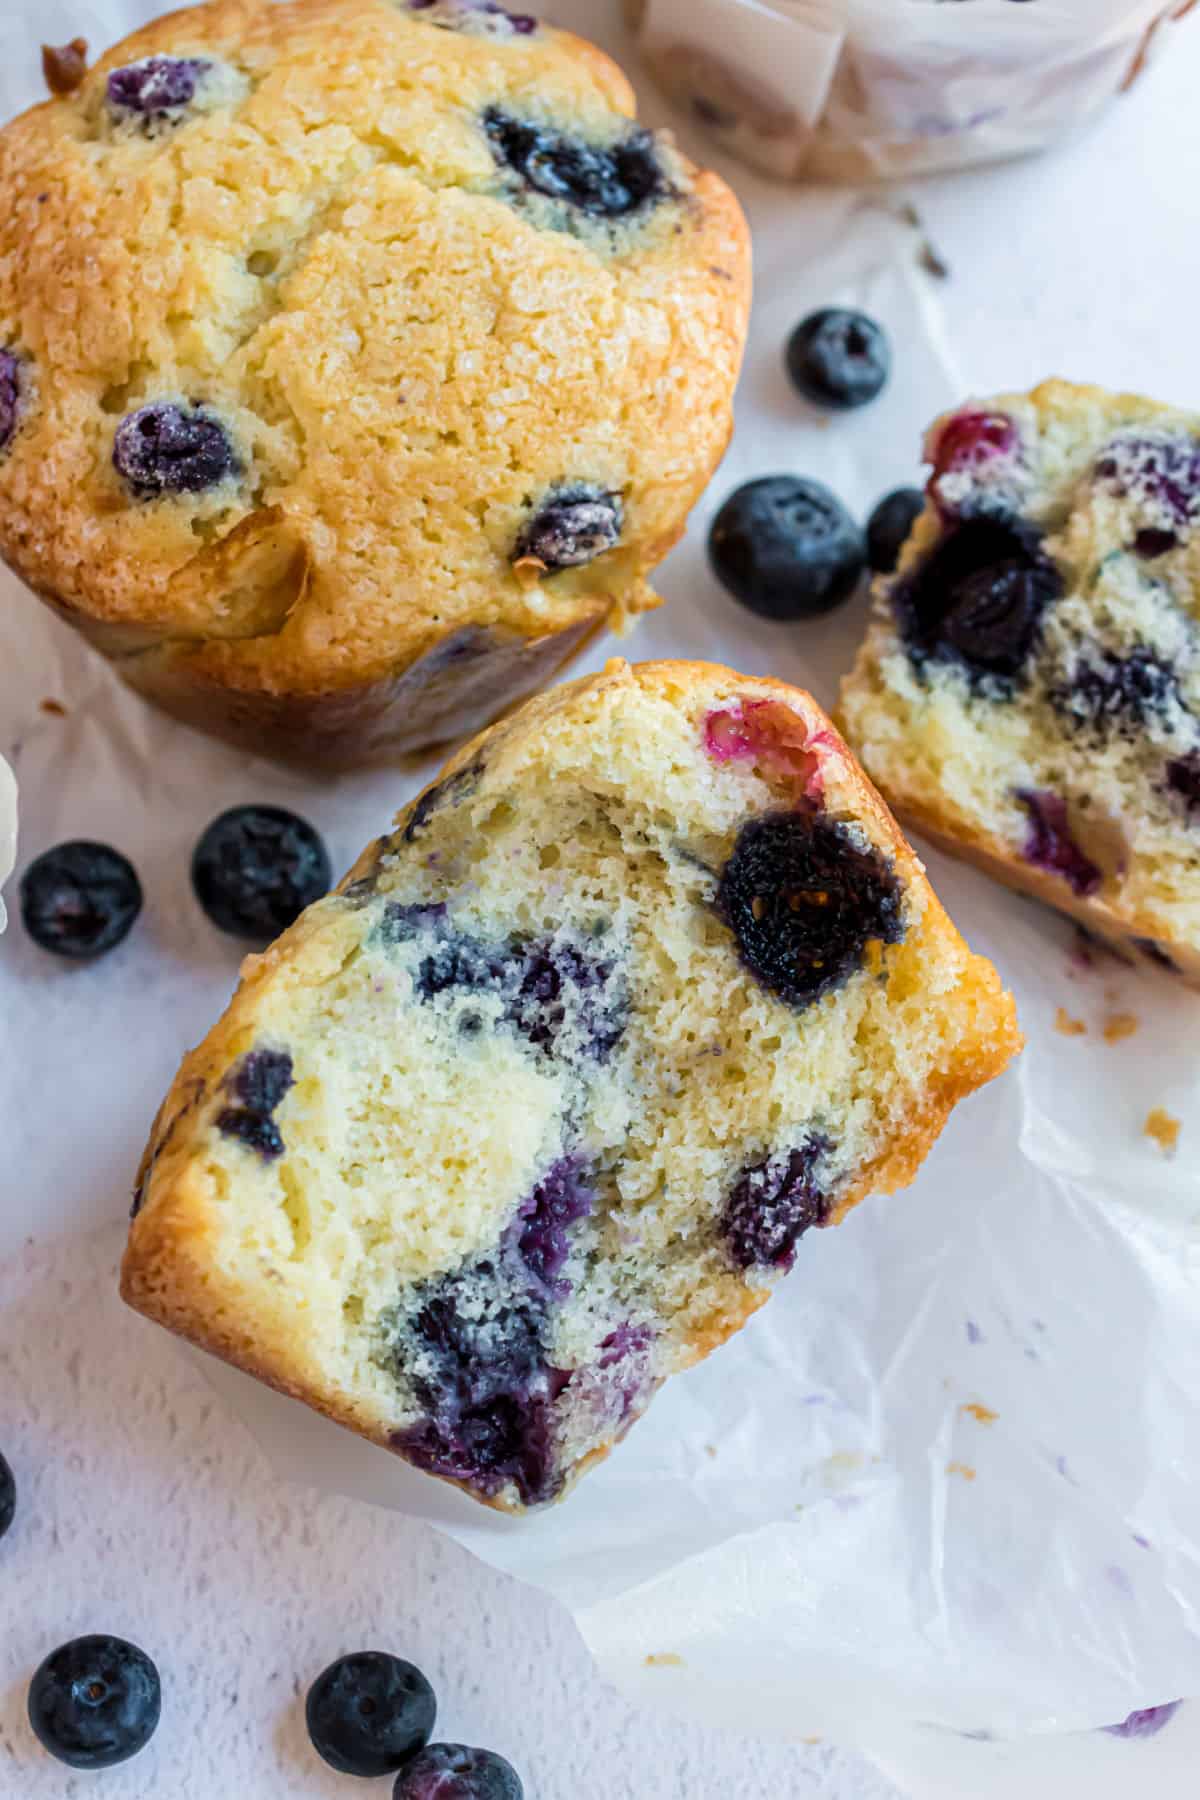 Bueberry muffin cut in half to reveal tender crumb and fresh berries.